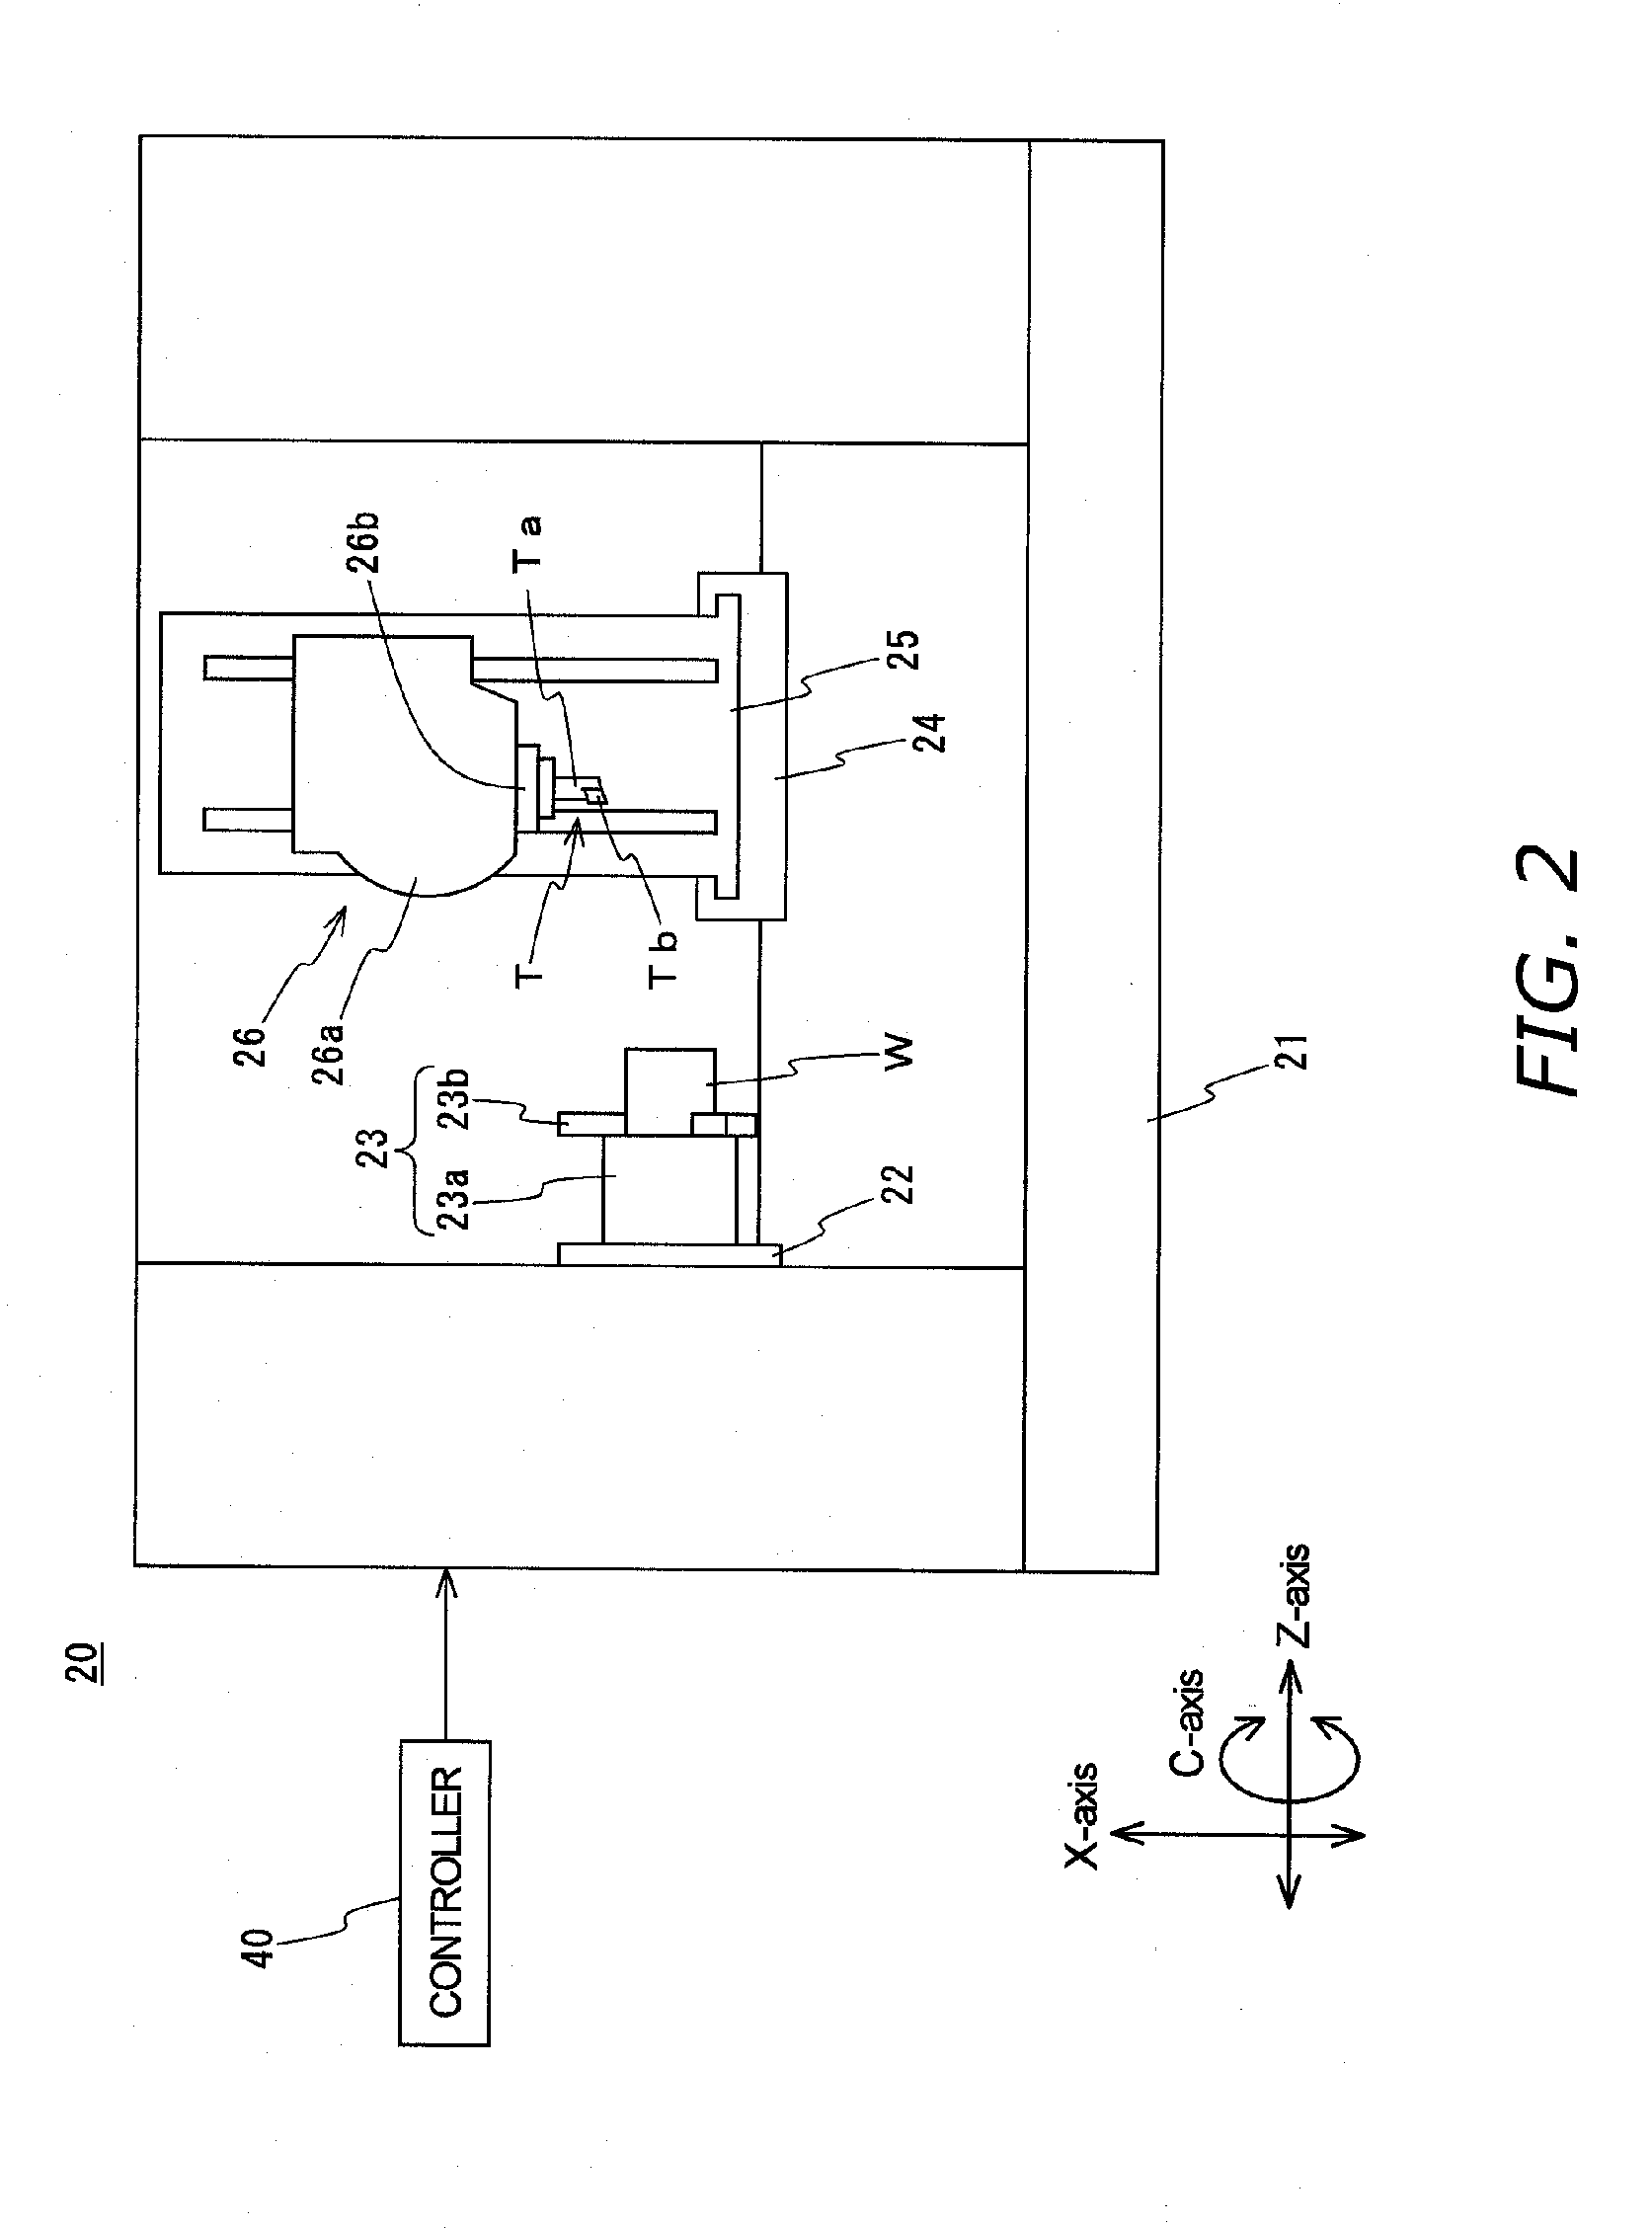 Interference Checking Device